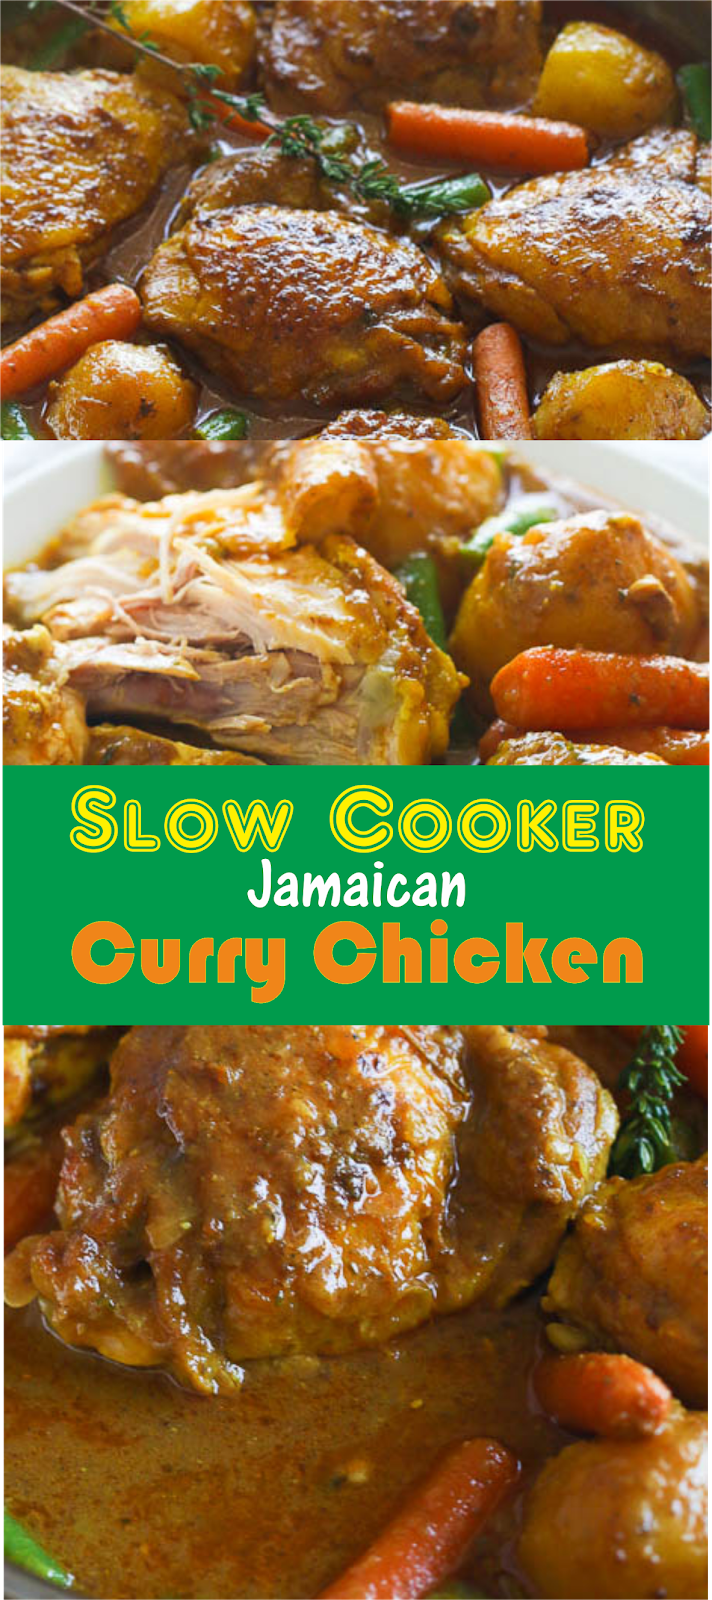 Slow Cooker Jamaican Curry Chicken | Amzing Food